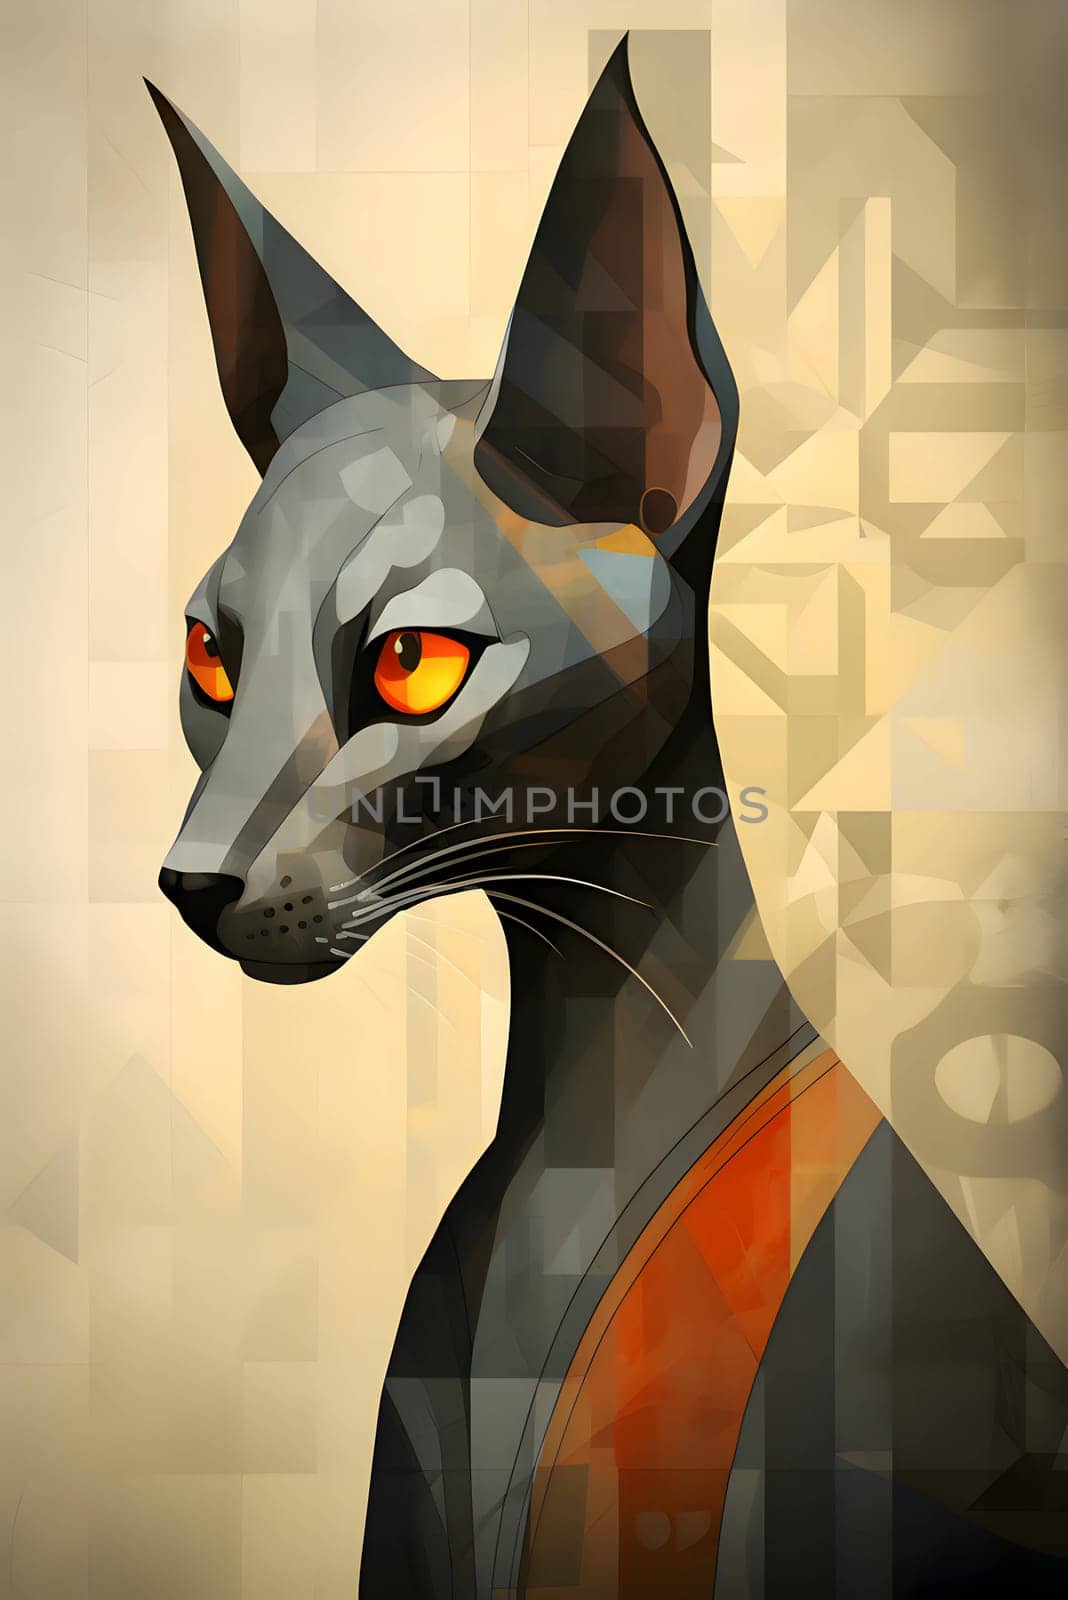 Abstract illustration: Illustration of a black cat with orange eyes on a geometric background